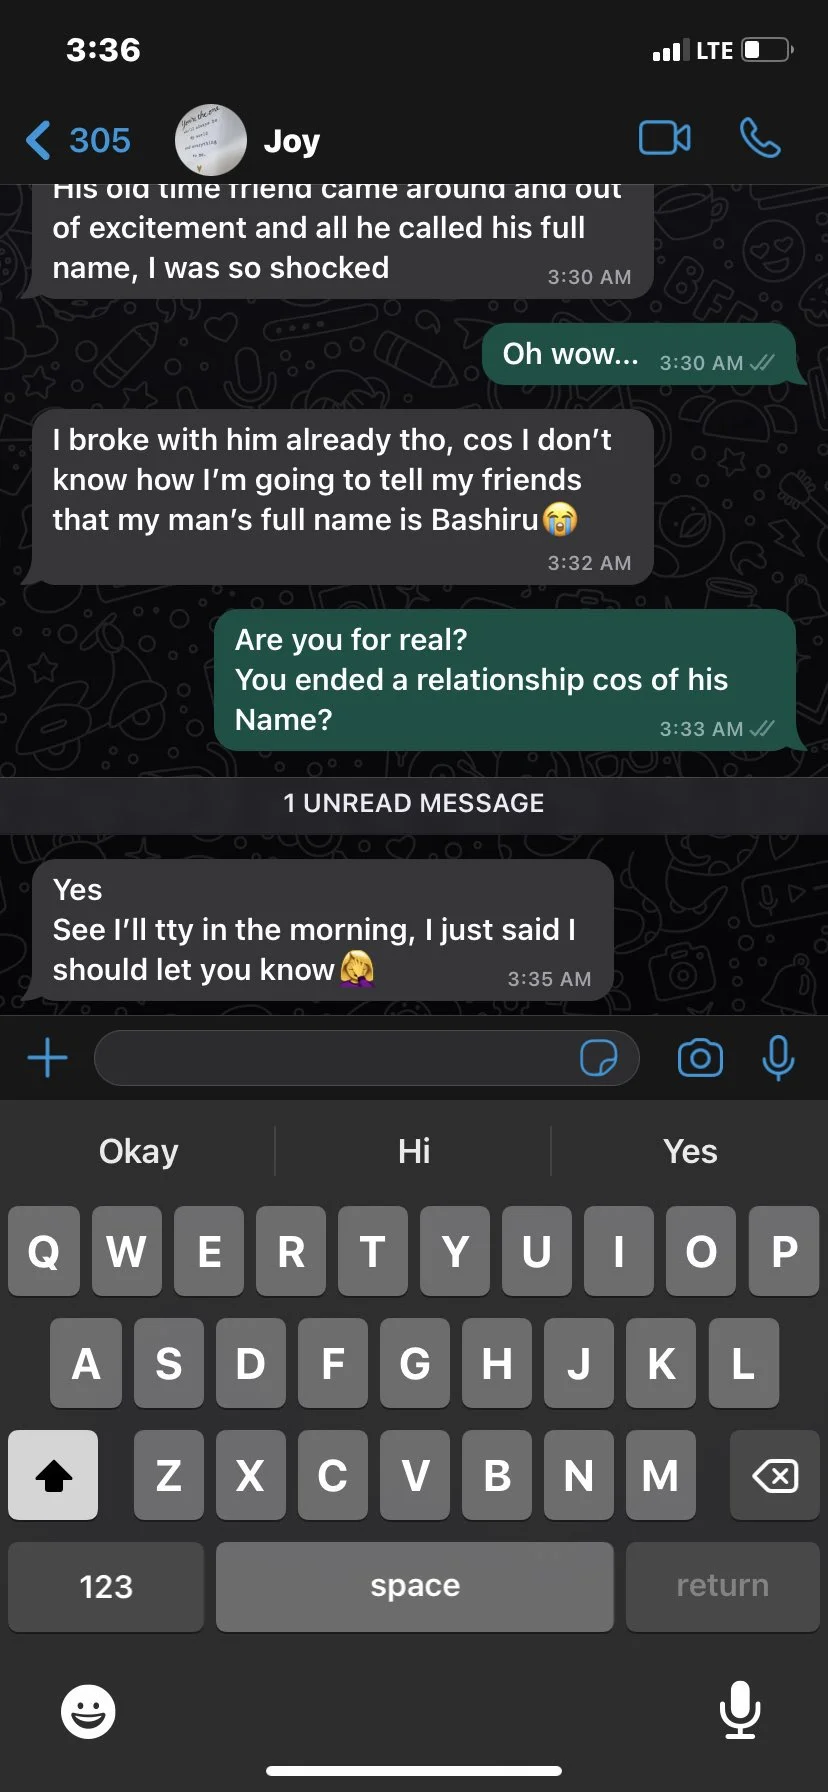 Lady breaks up with boyfriend after discovering his real name is Bashiru - b